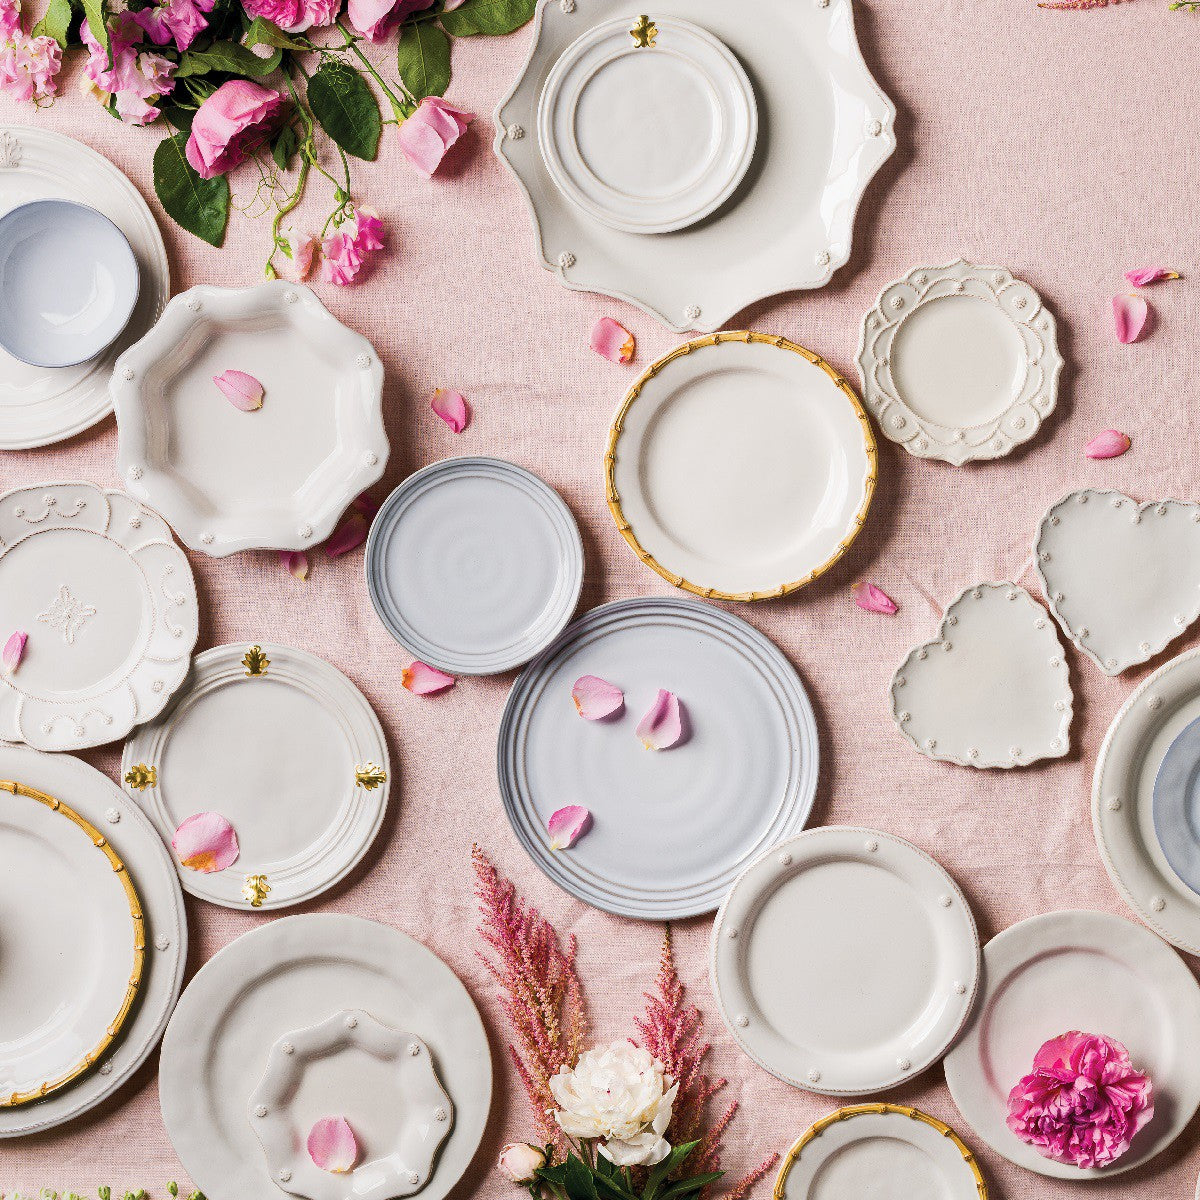 display of plates and bowls on a pink table cloth with flowers and petals